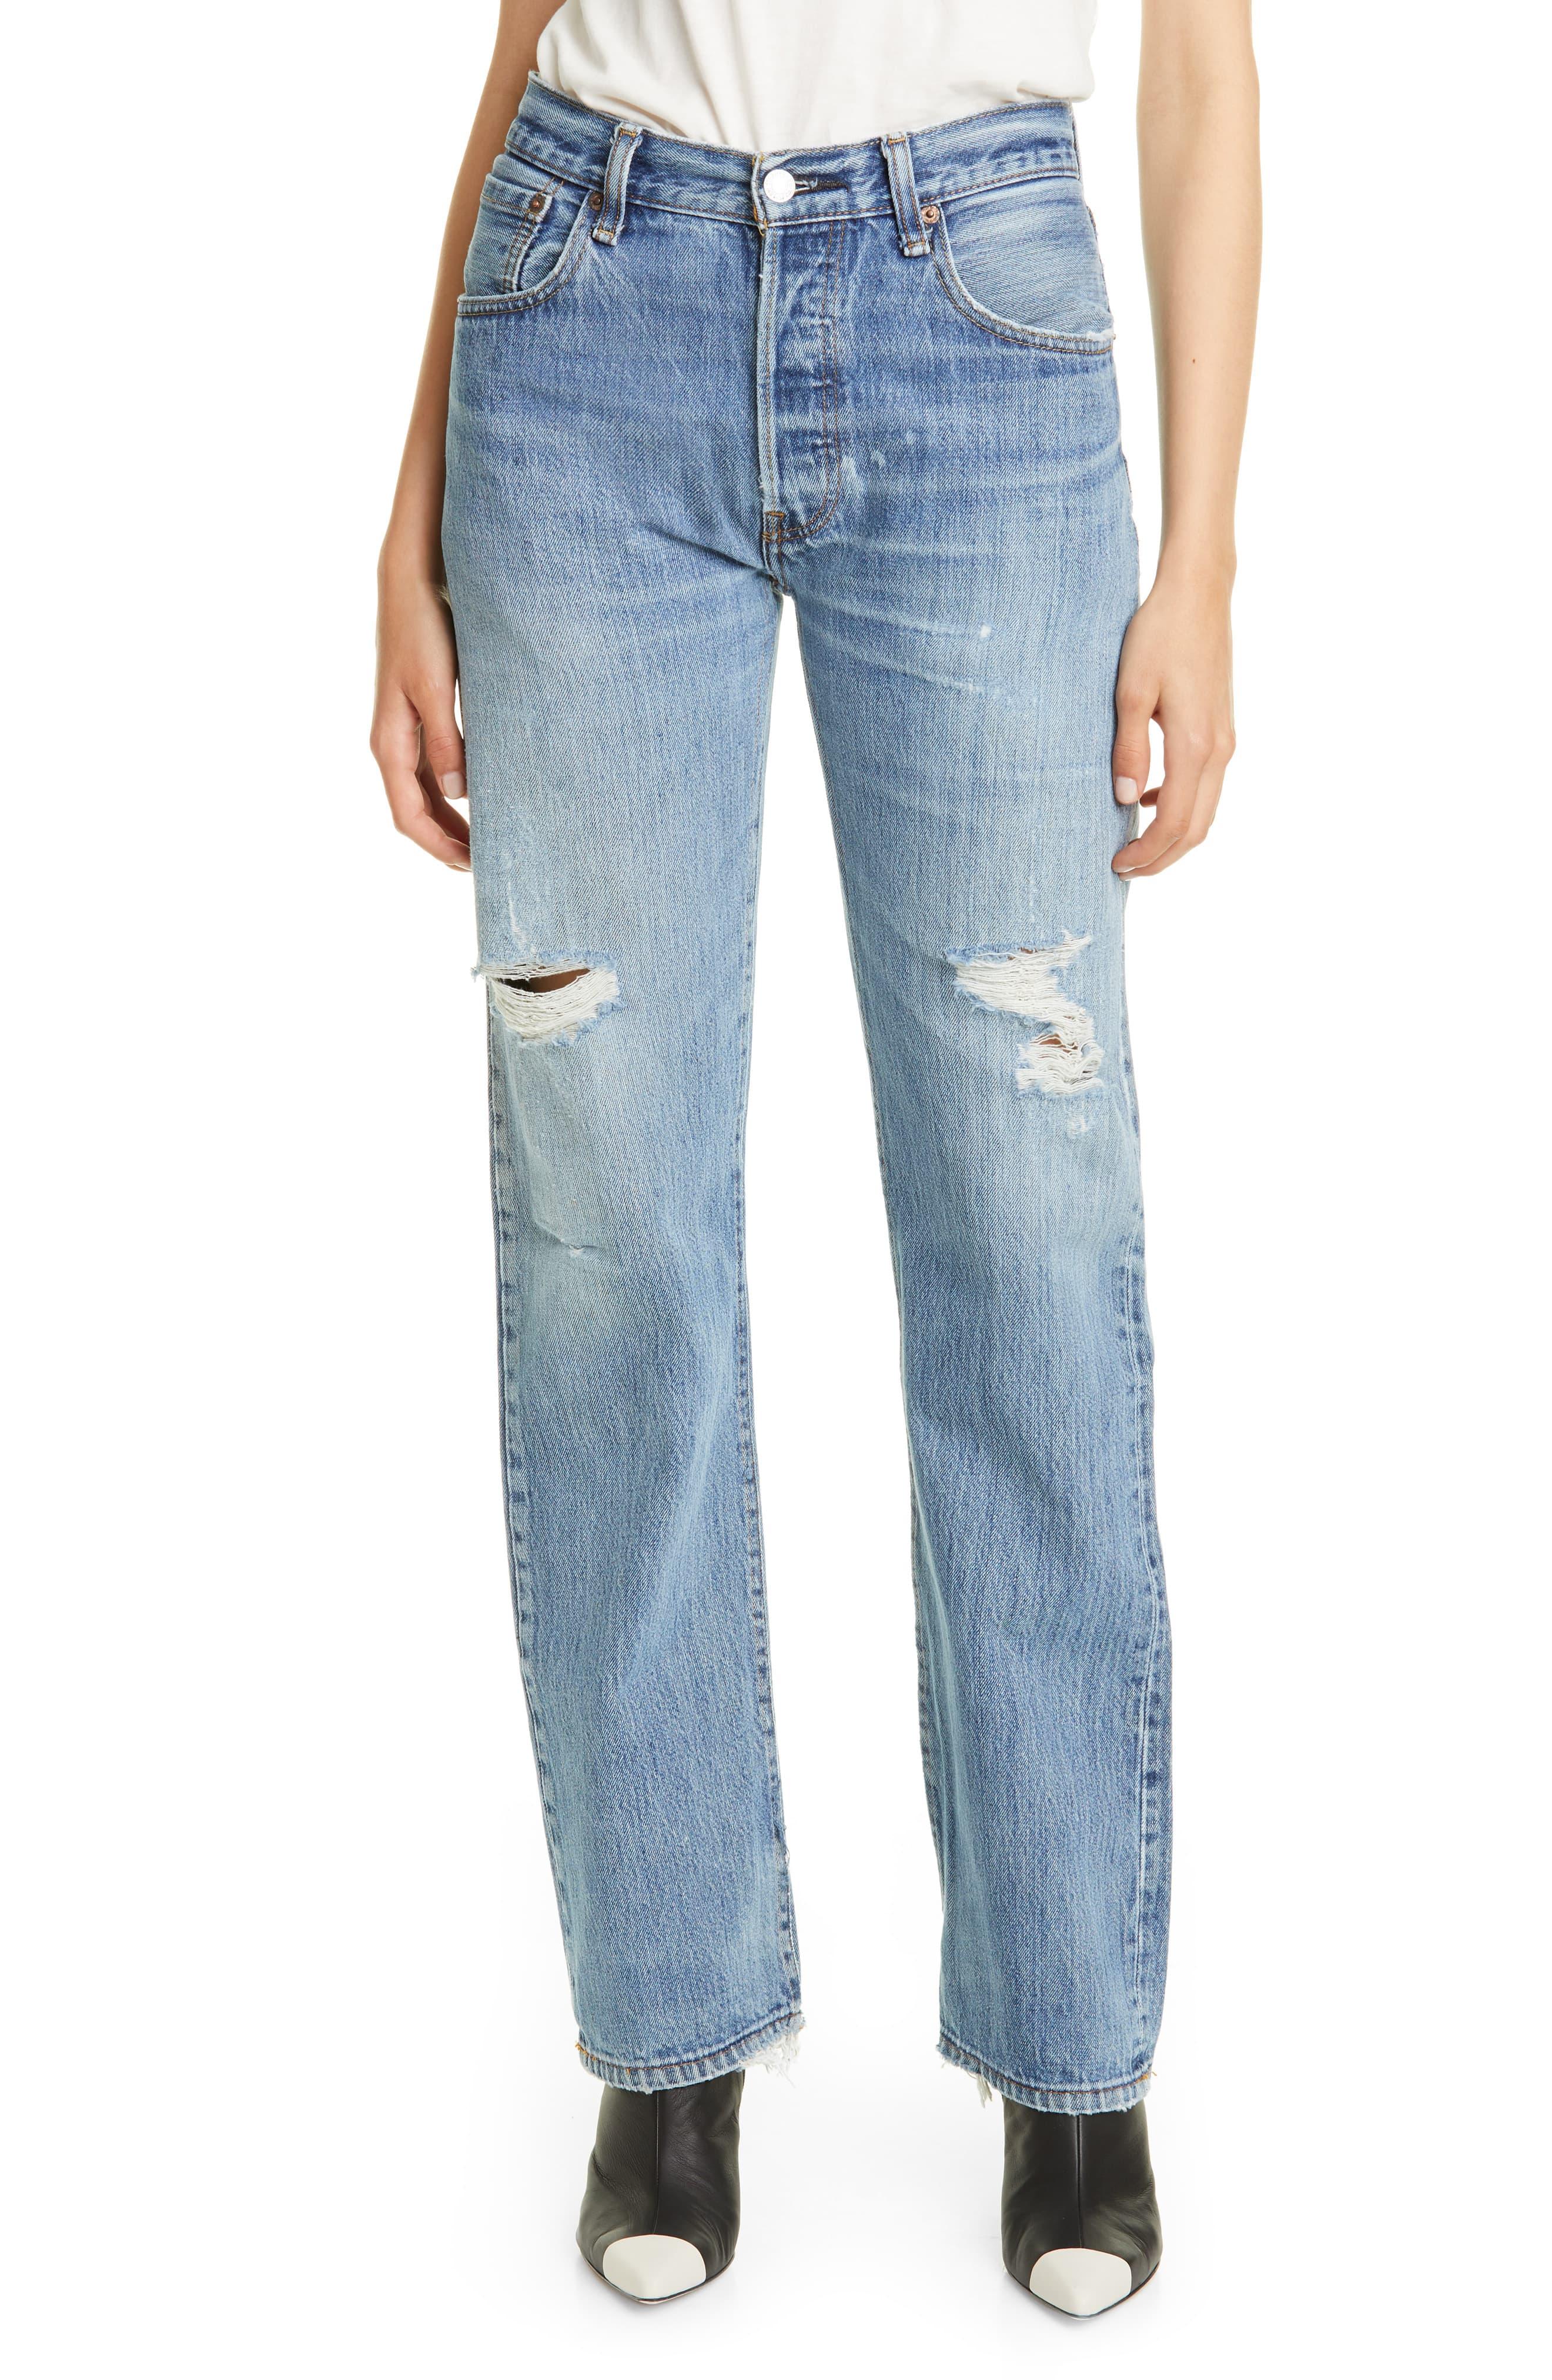 RE/DONE Denim Reconstructed '90s Jeans in Indigo (Blue) - Lyst